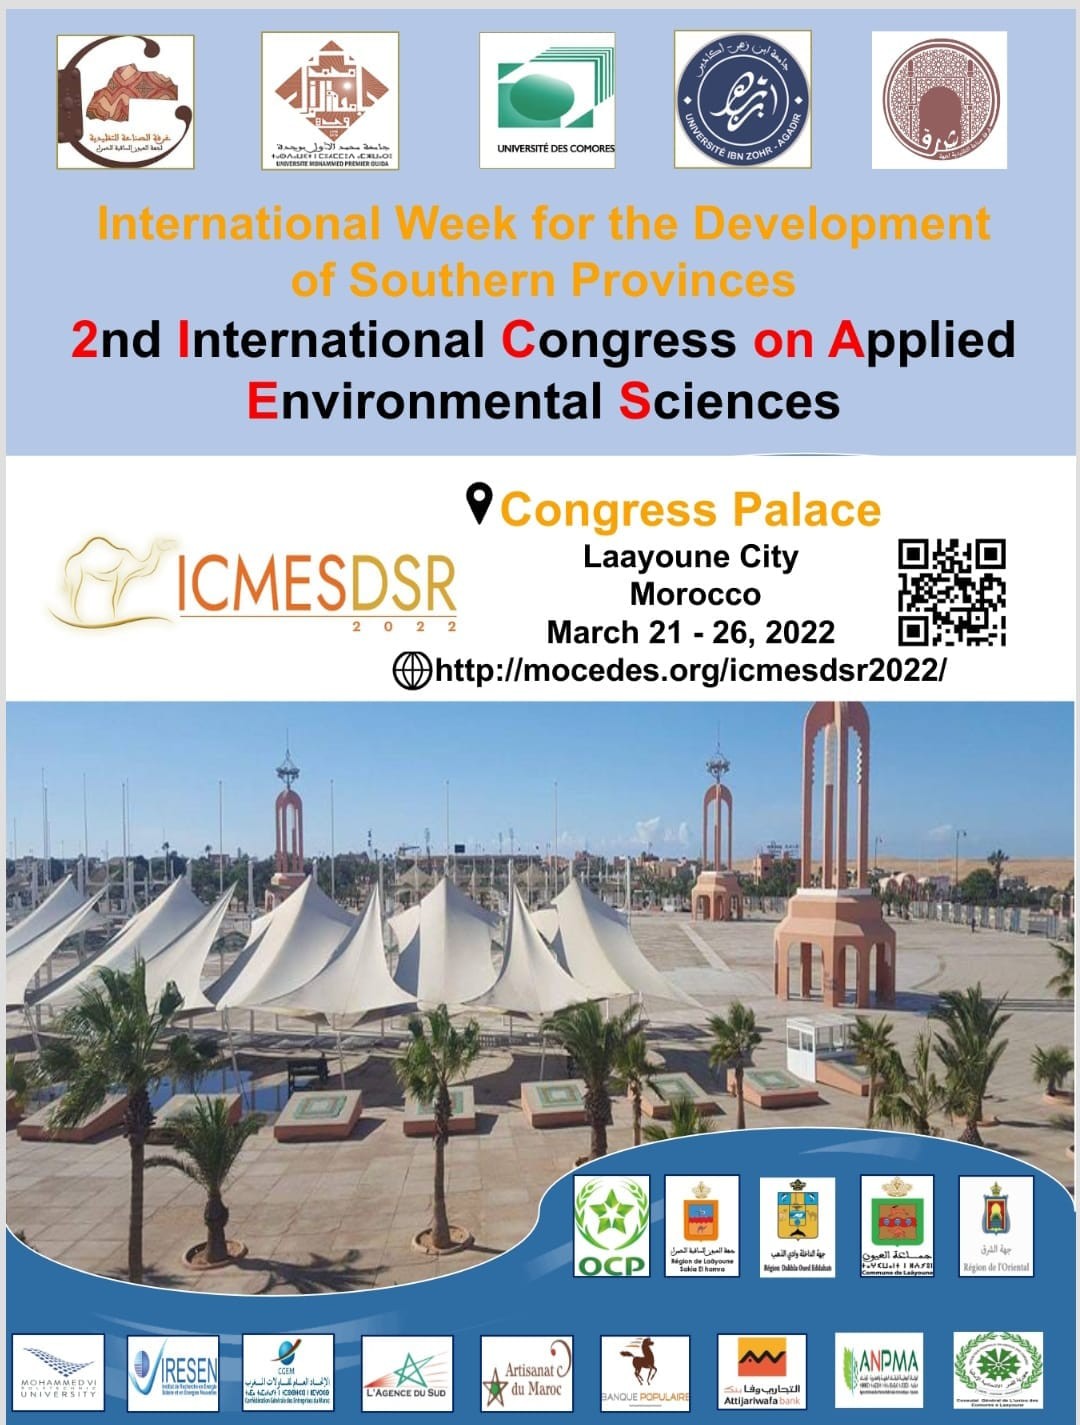 2nd International Congress on Applied Environmental Sciences